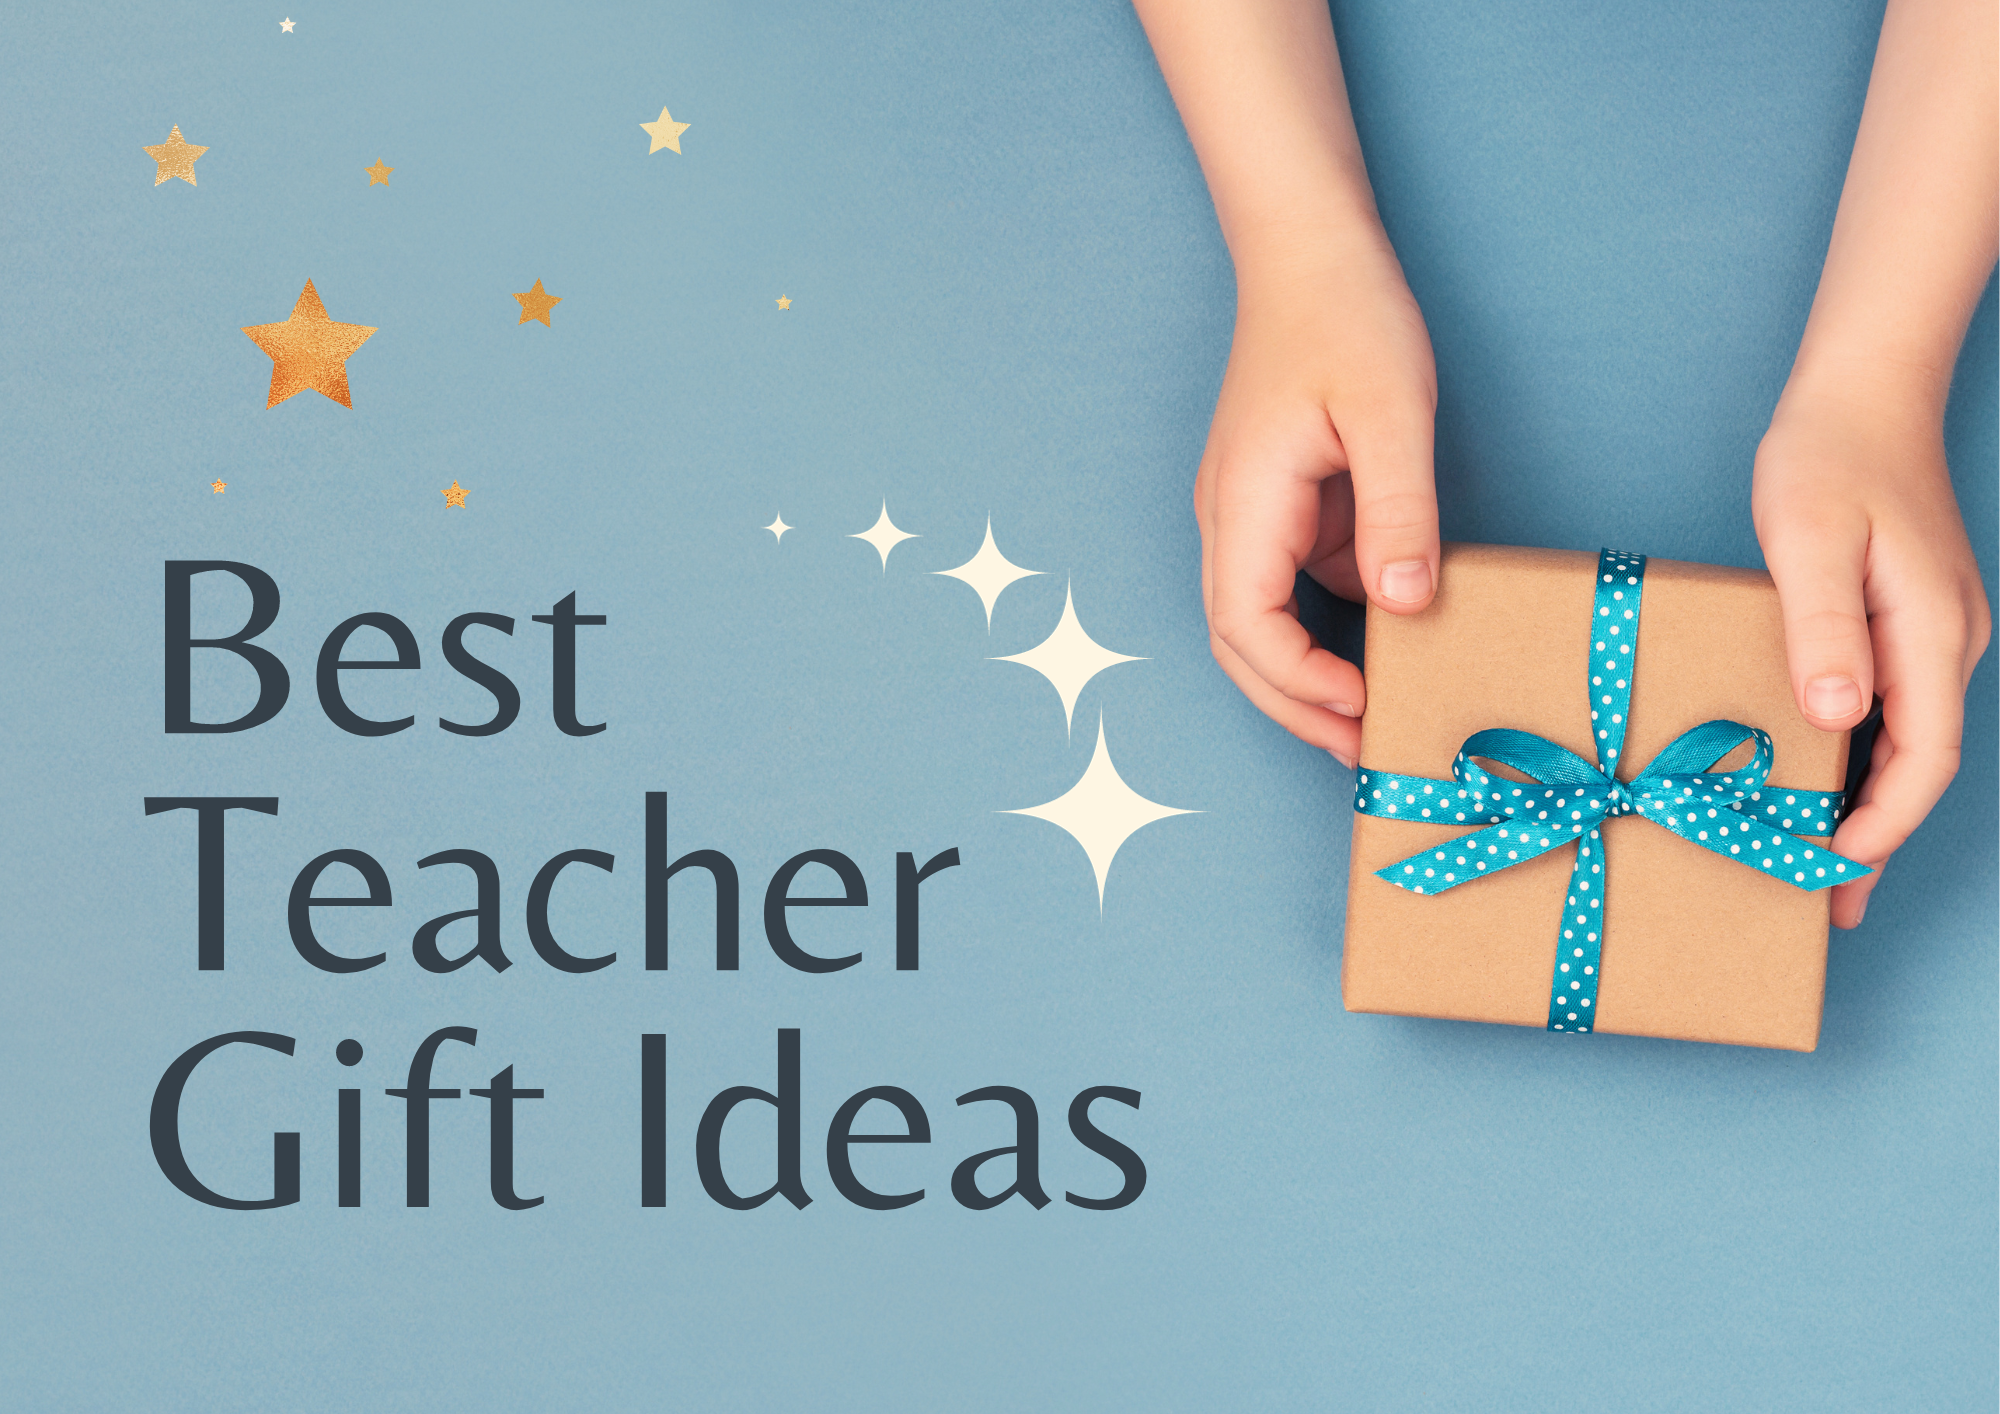 The Best Teacher Thank You Gift Ideas for School | The Basketry